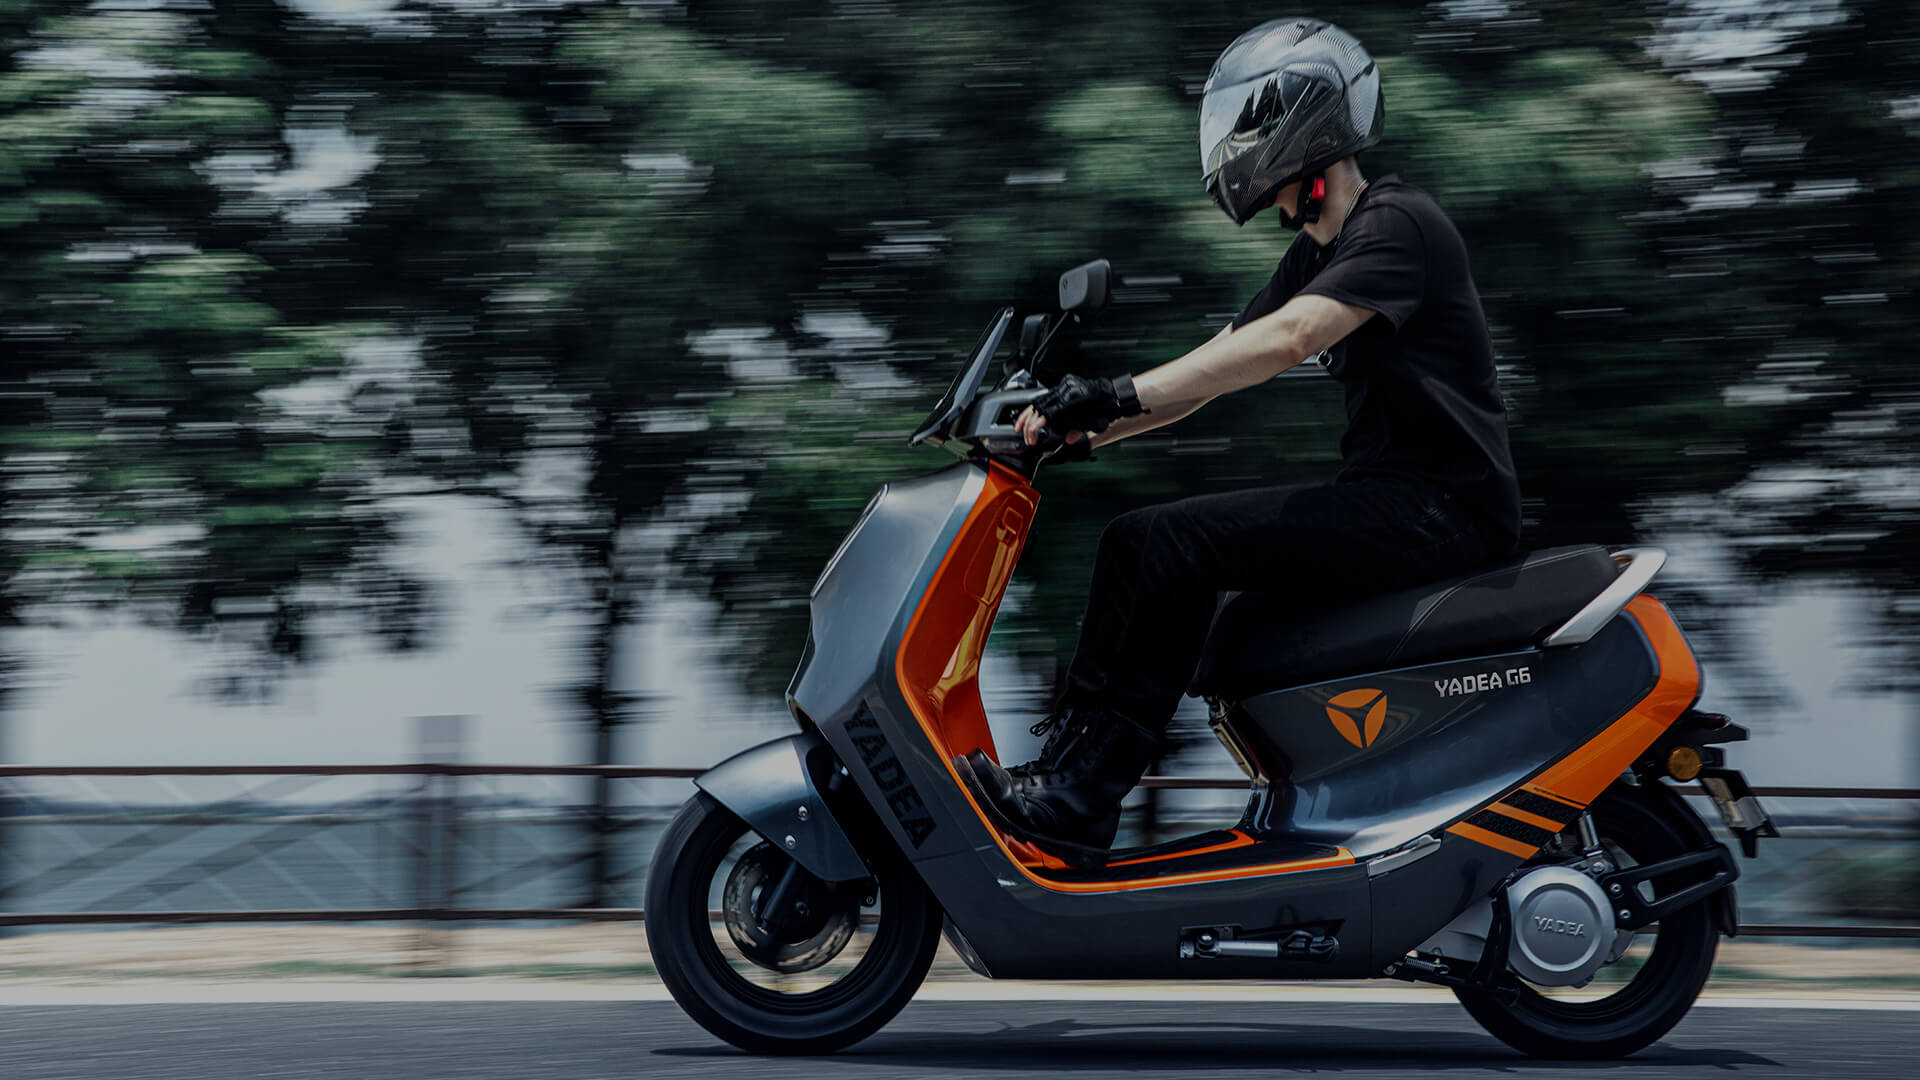 Yadea G6: Electric scooter with impressive 150km range launched in Nepal